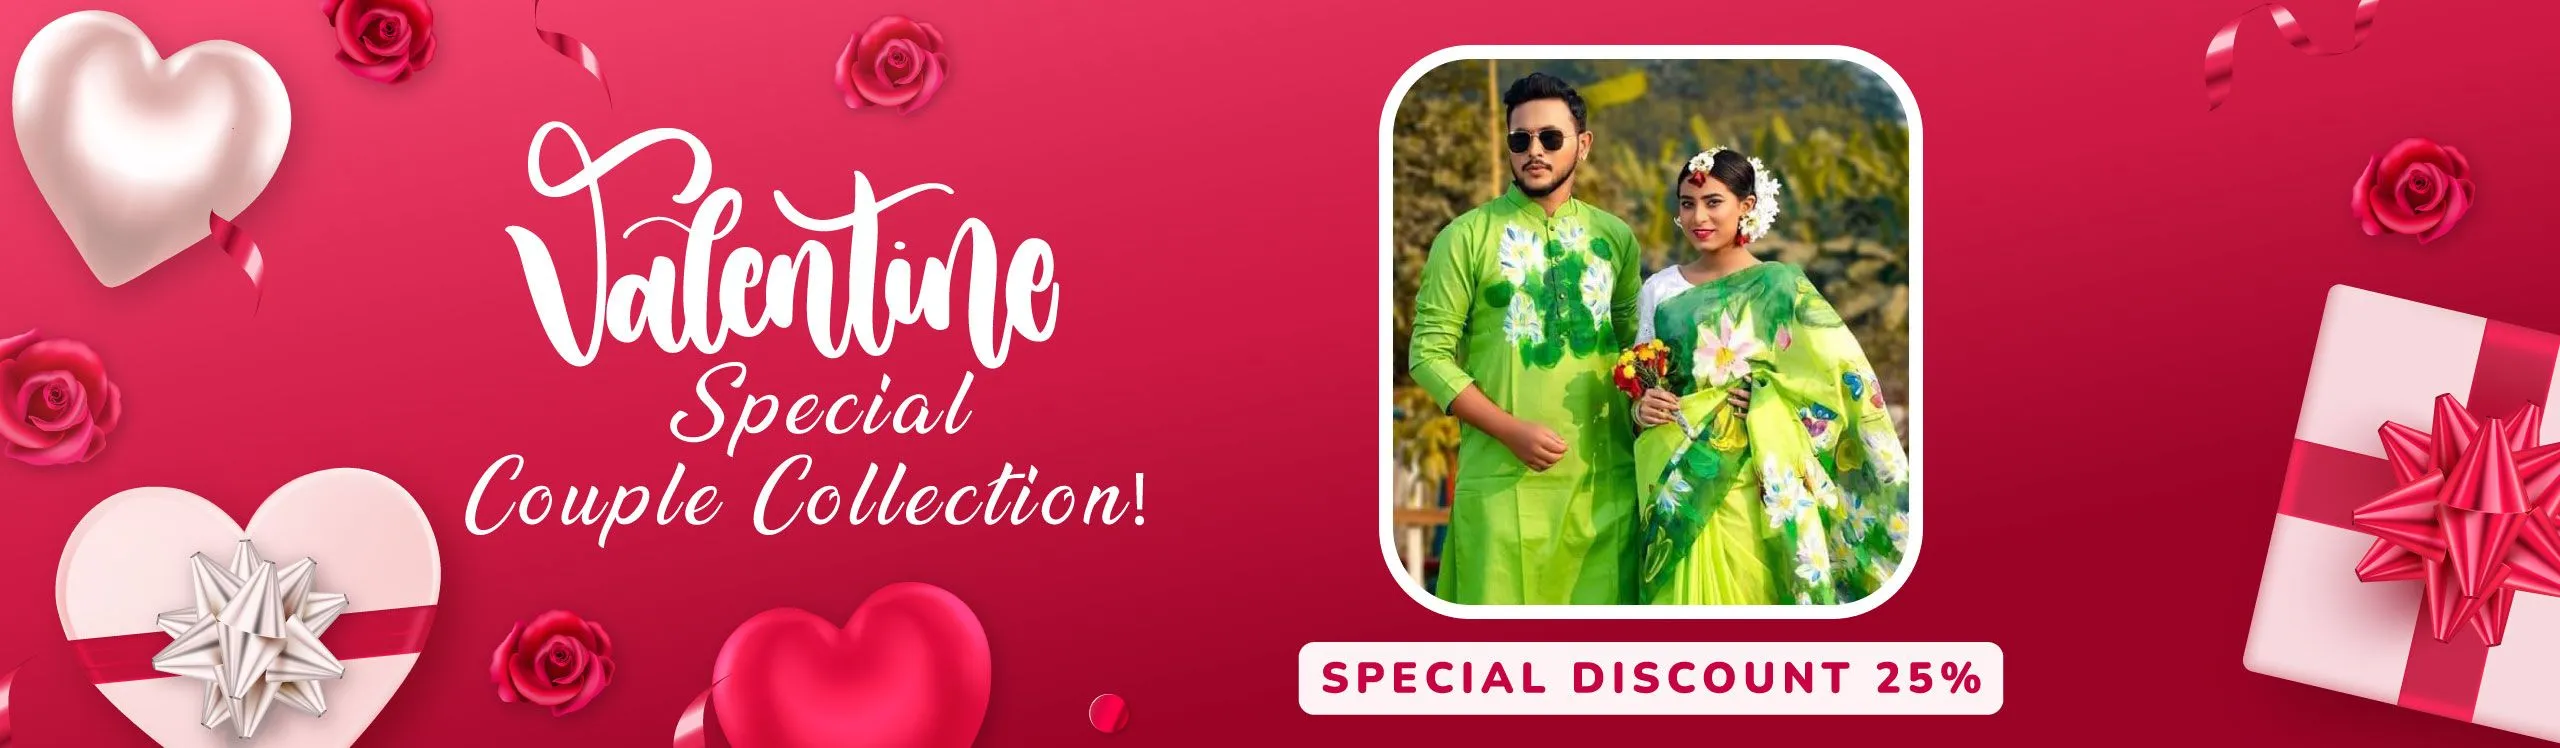 Valentine Special Couple Collection